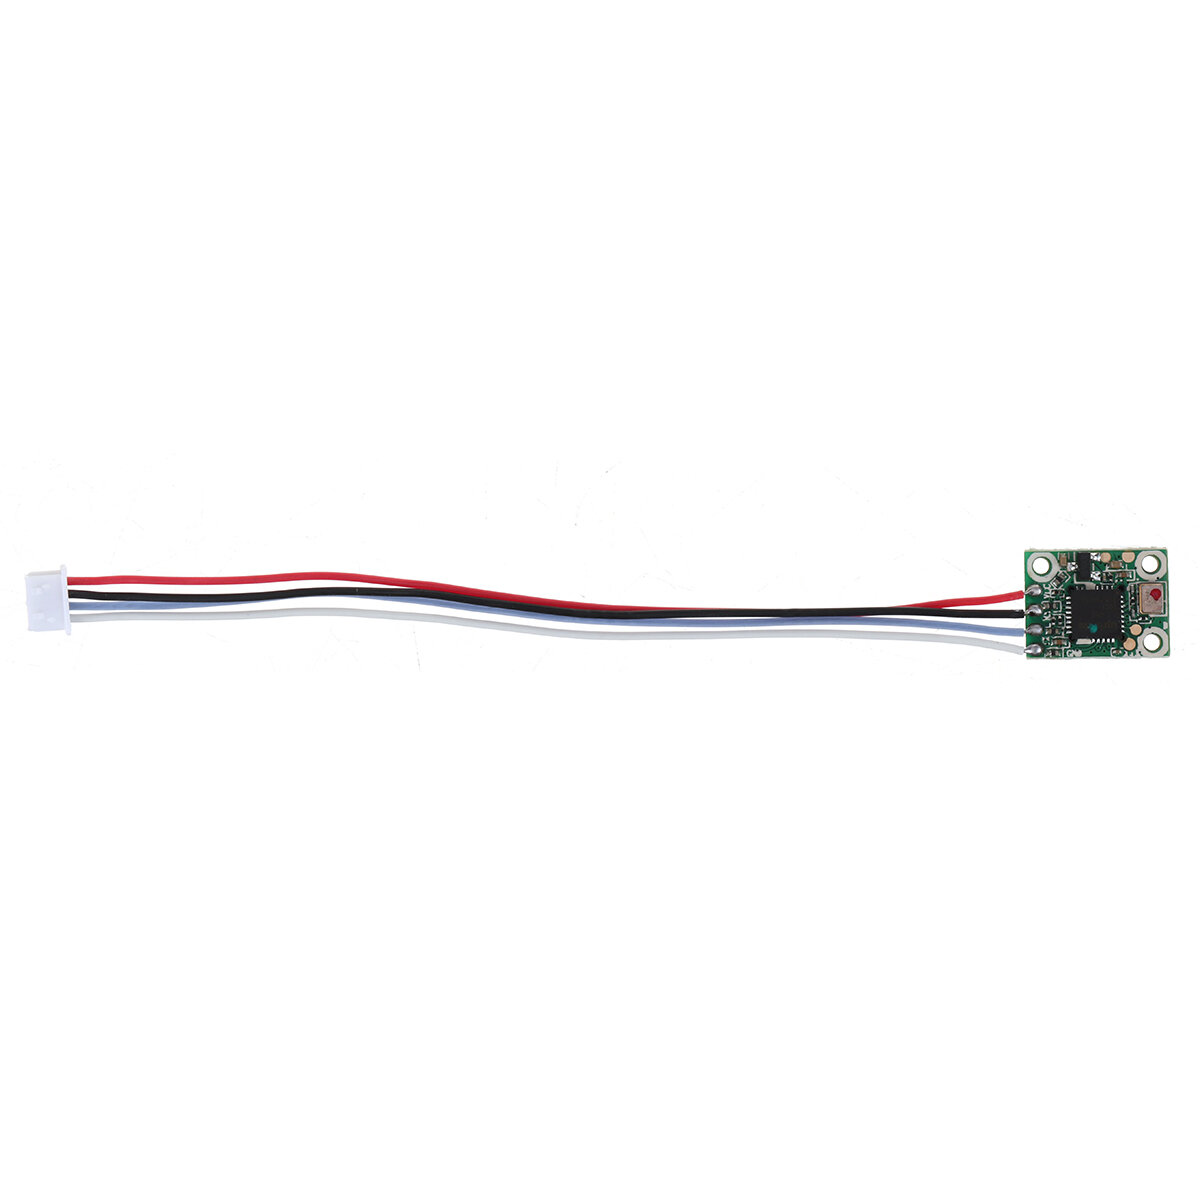 Eachine E110 Optical Flow Module RC Helicopter Parts